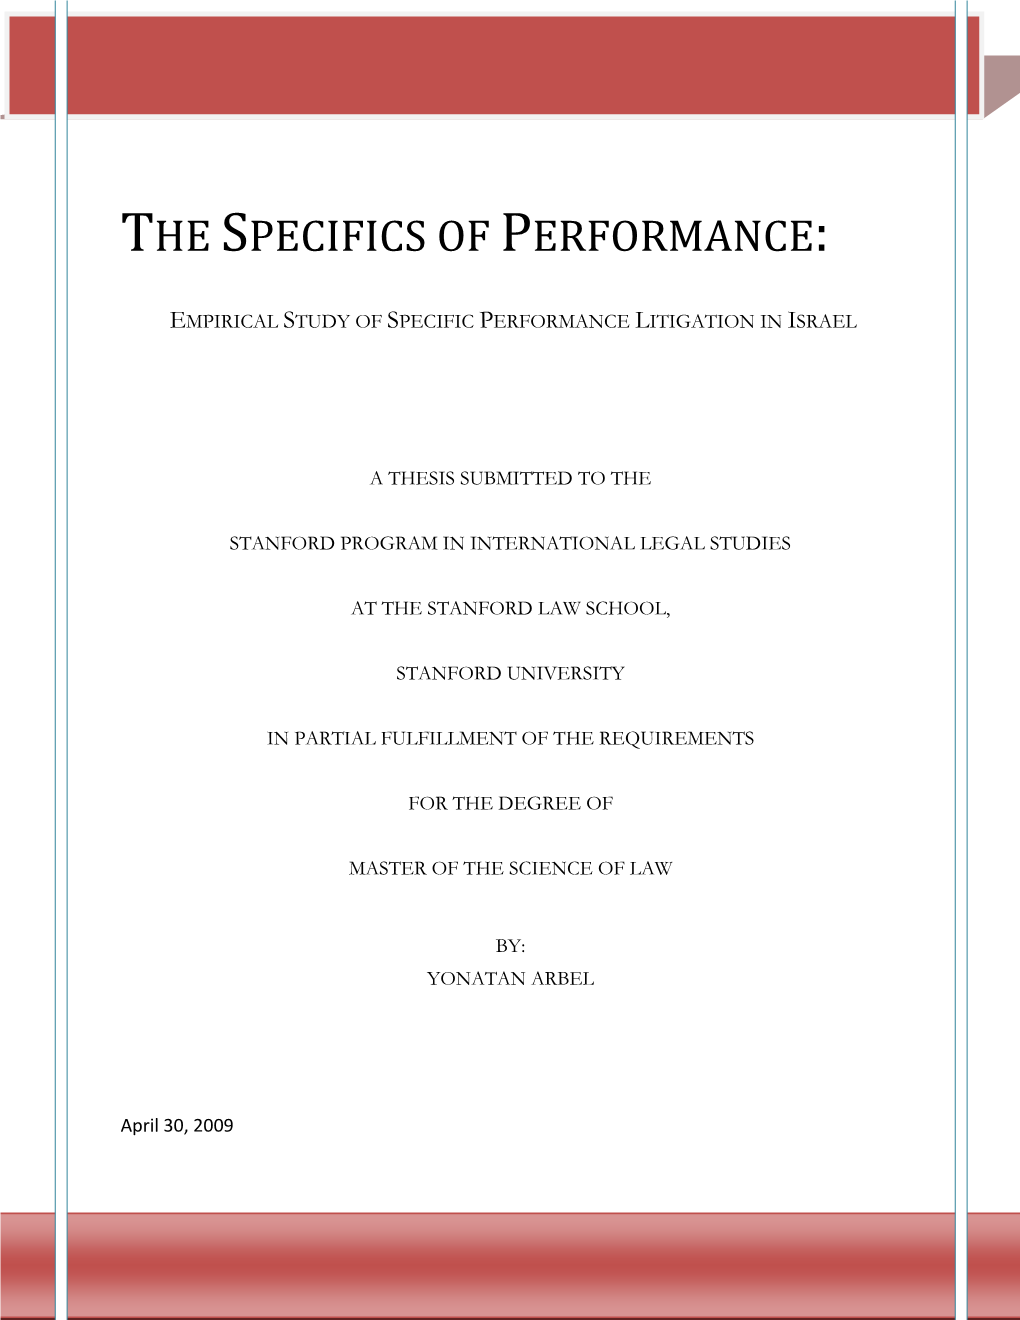 The Specifics of Performance